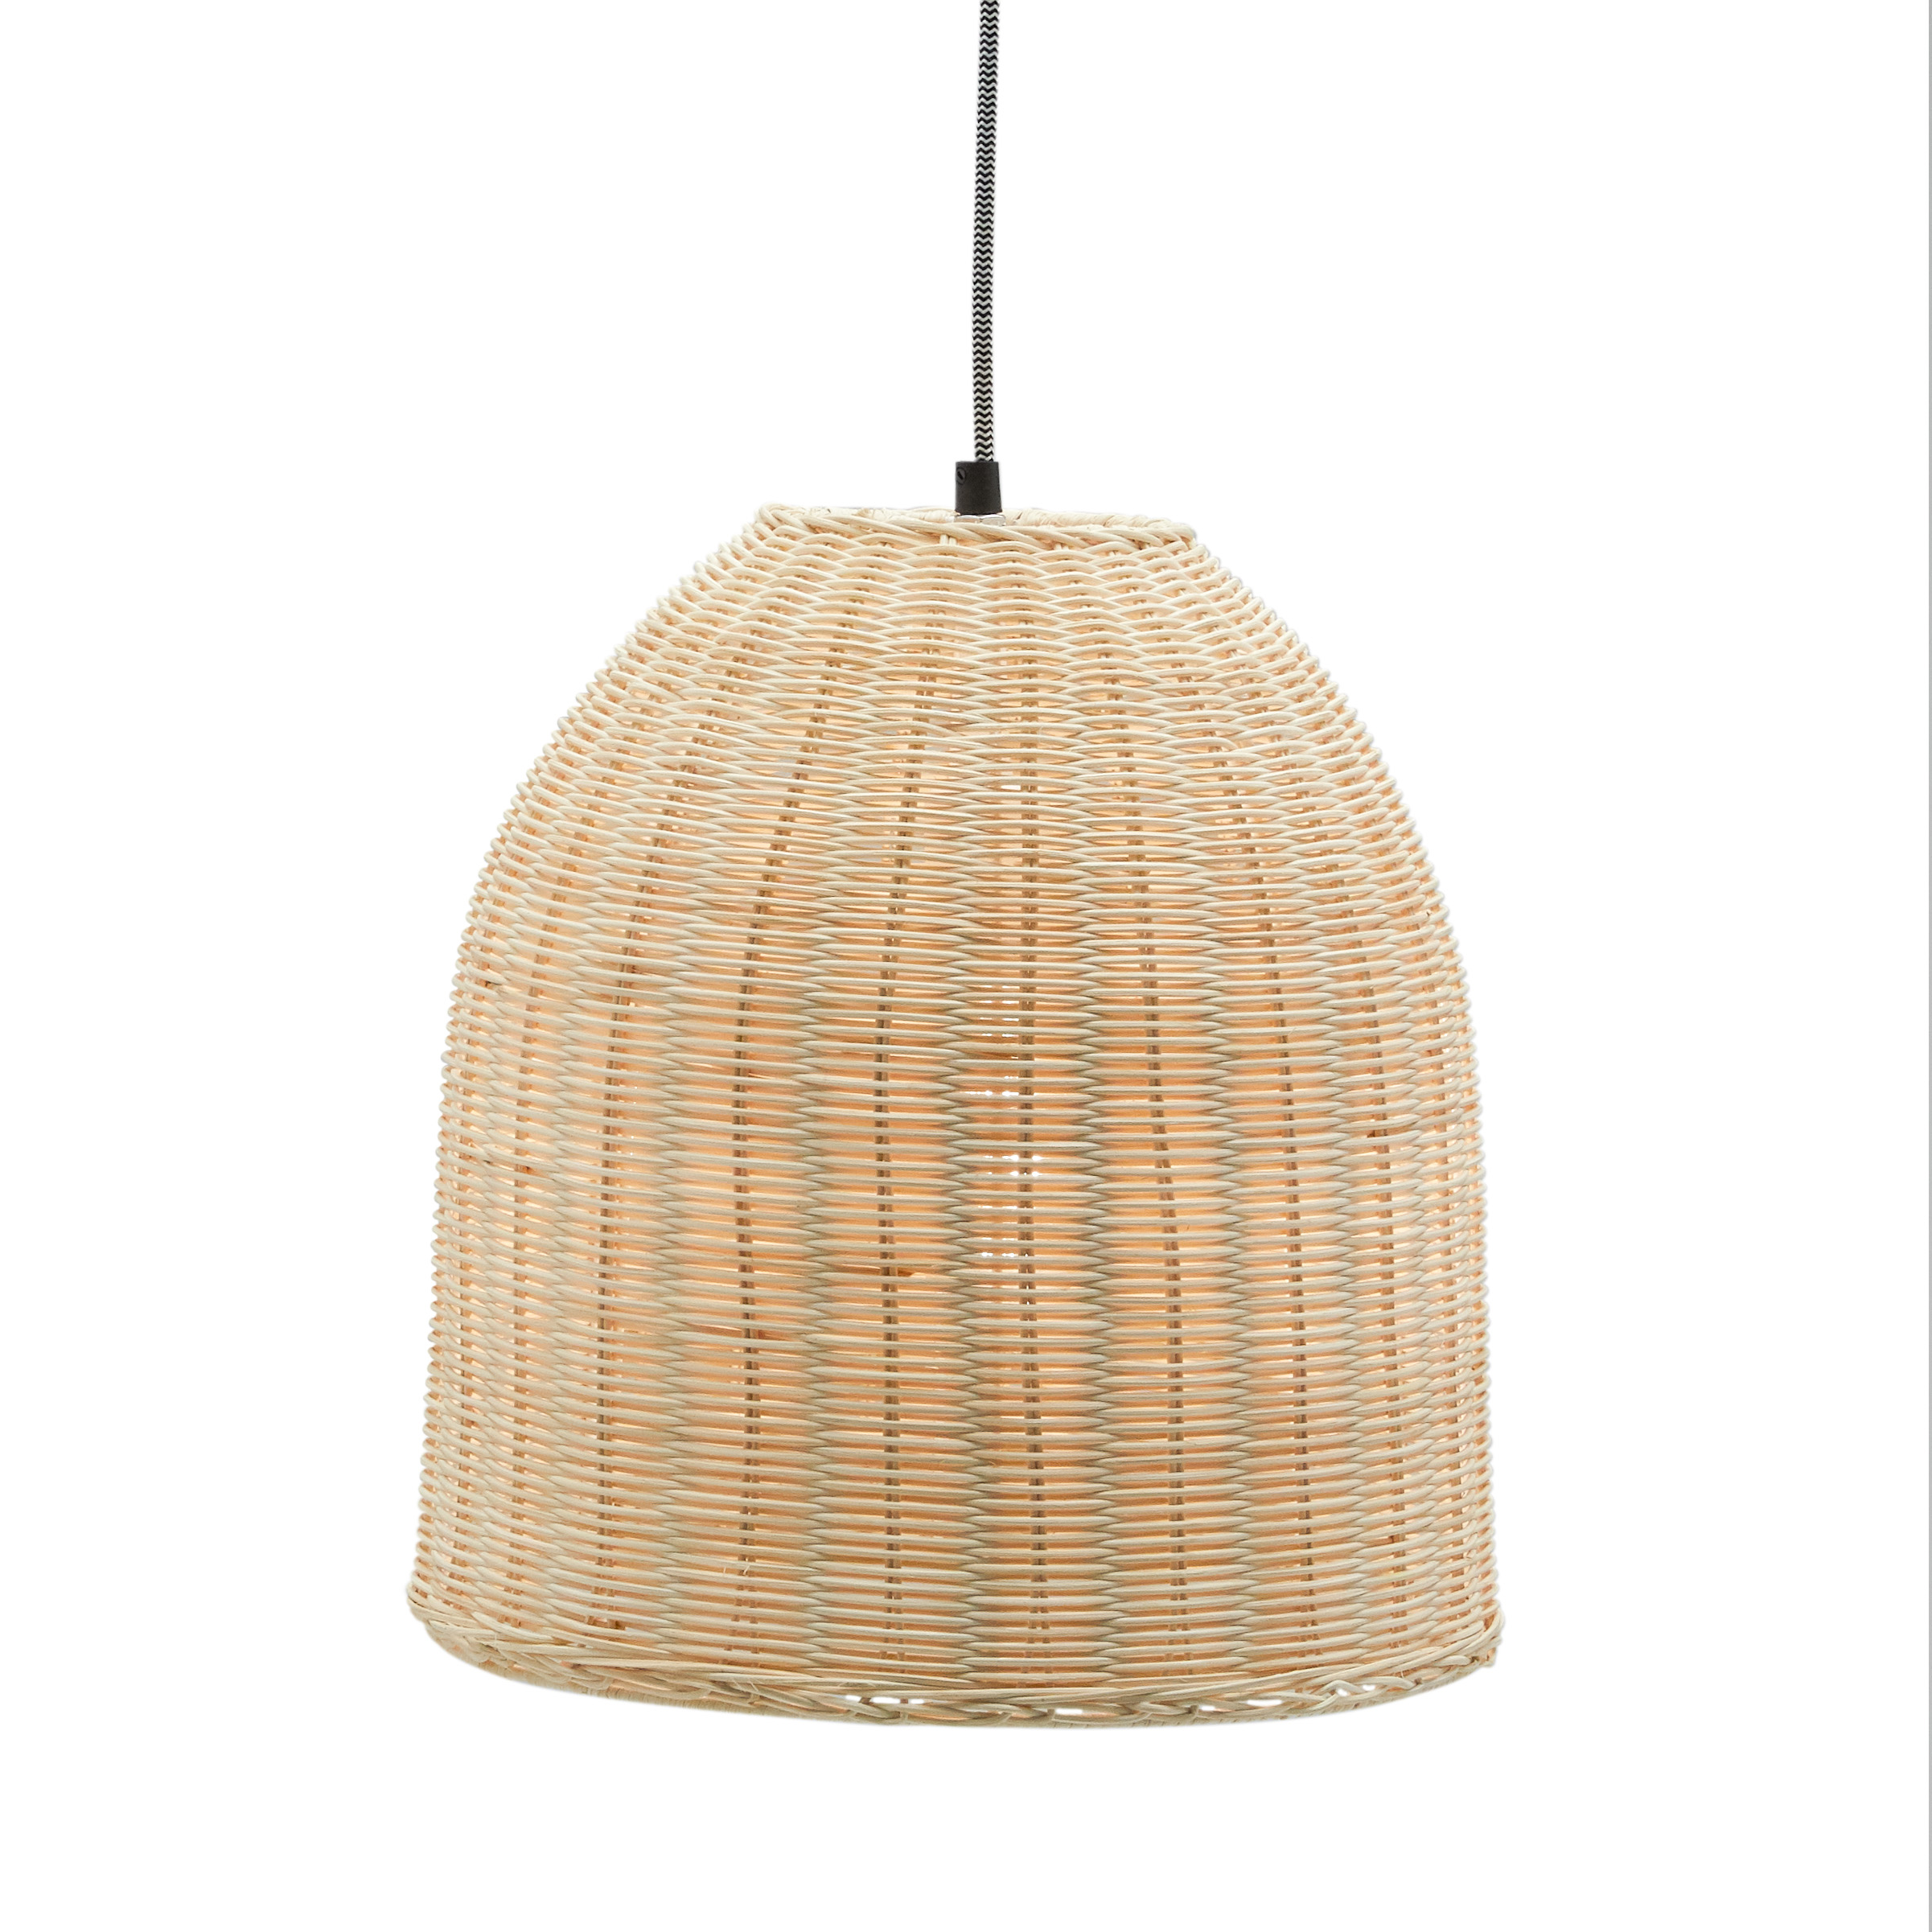 Rattan Pendant Light by Drew Barrymore Flower Home - image 1 of 7